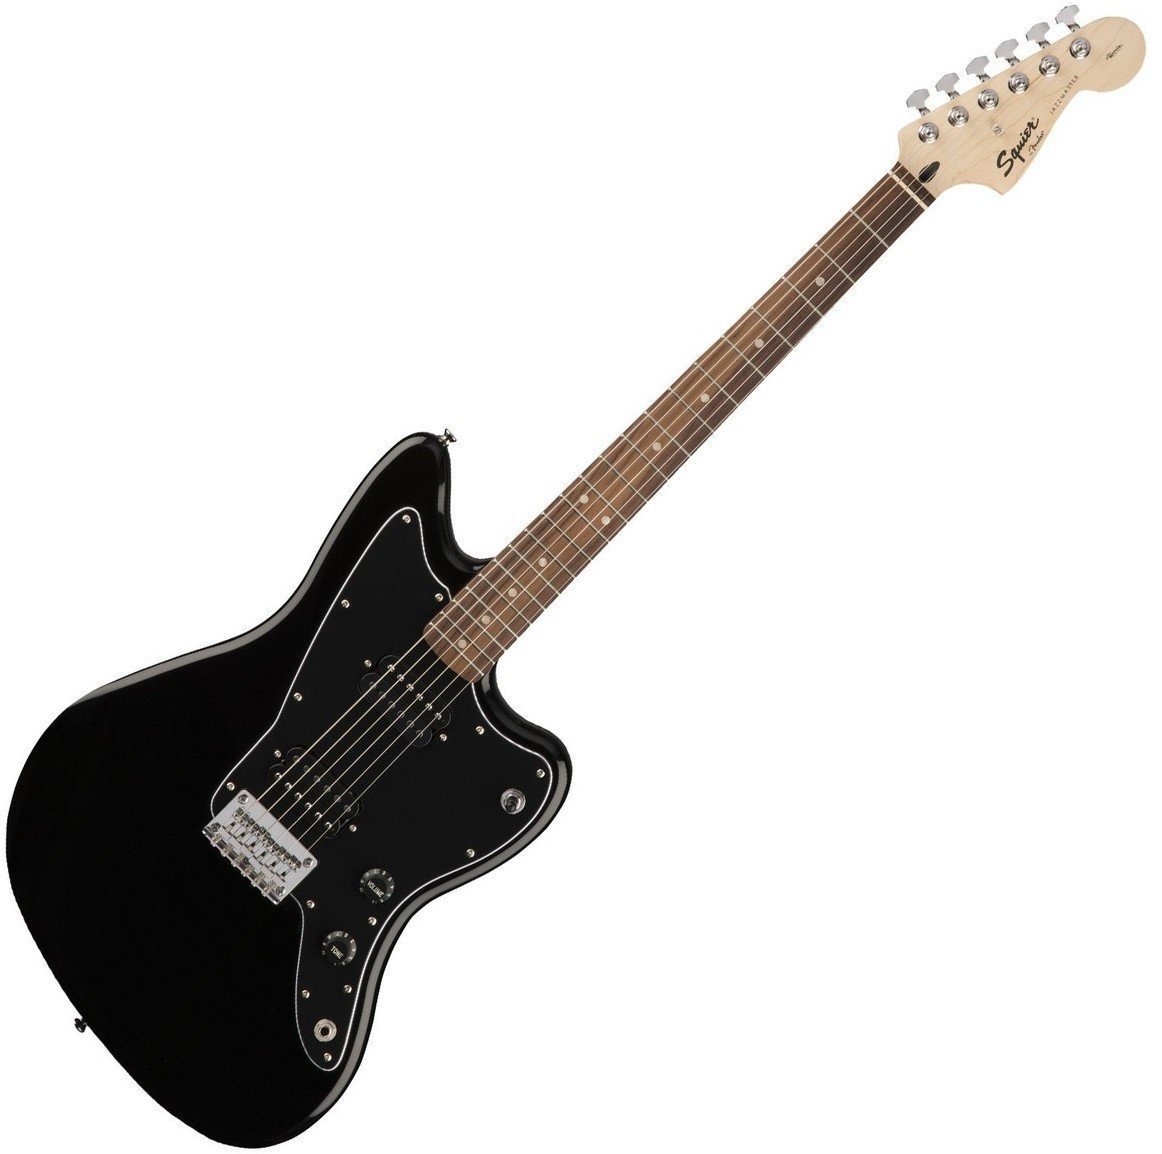 Electric guitar Fender Squier Affinity Series Jazzmaster HH IL Black